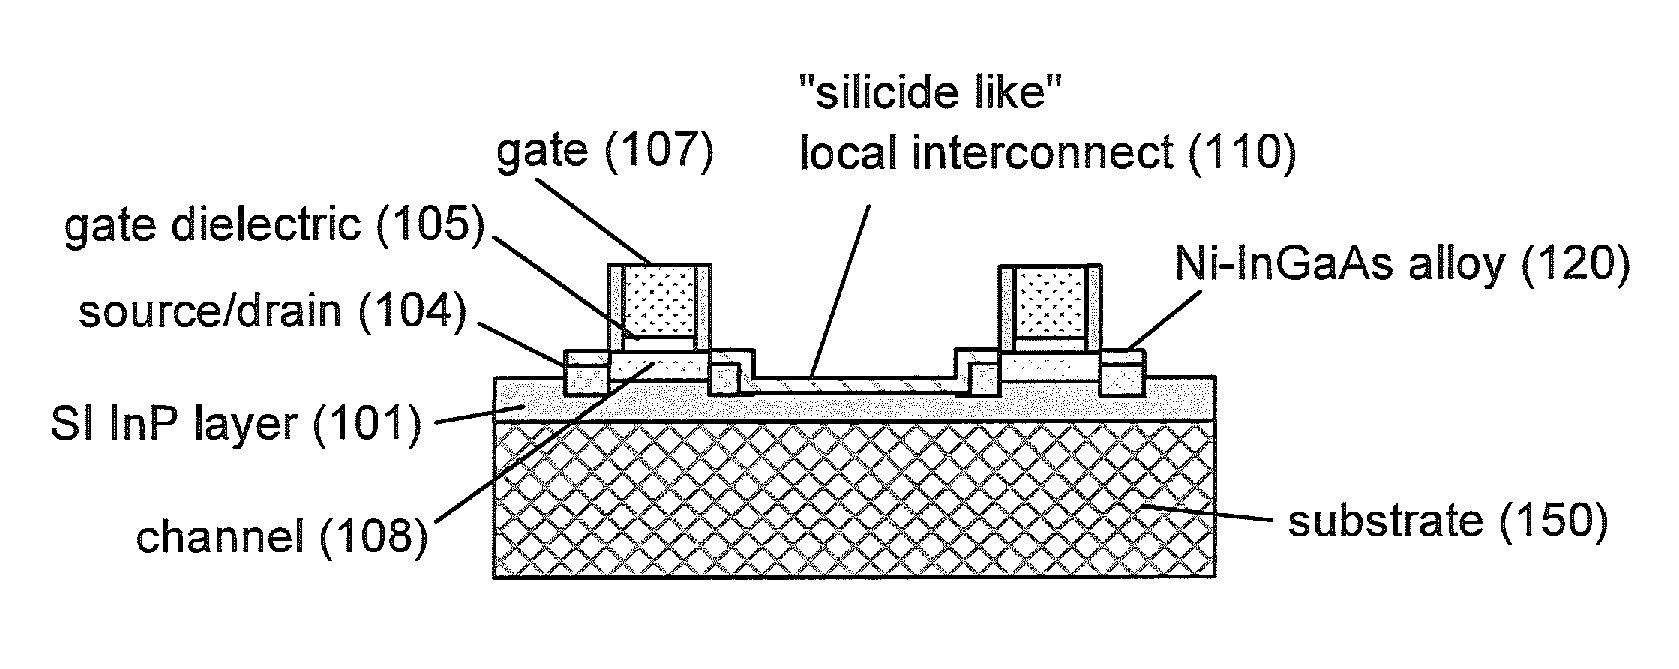 Local interconnects by metal-III-V alloy wiring in semi-insulating III-V substrates